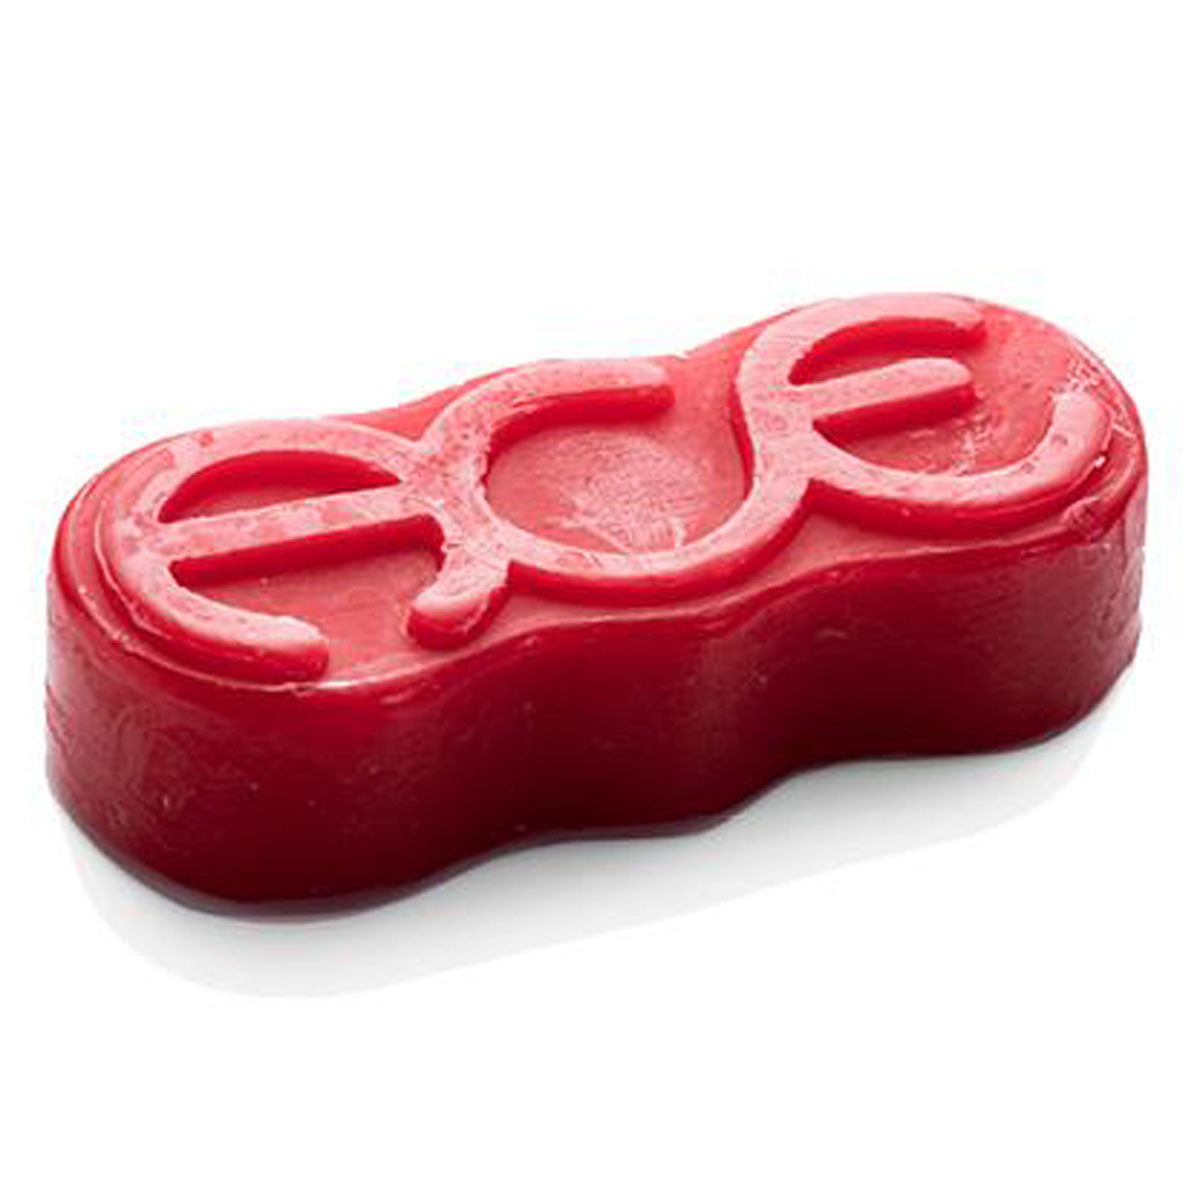 Ace Rings Skate Wax - Red image 1